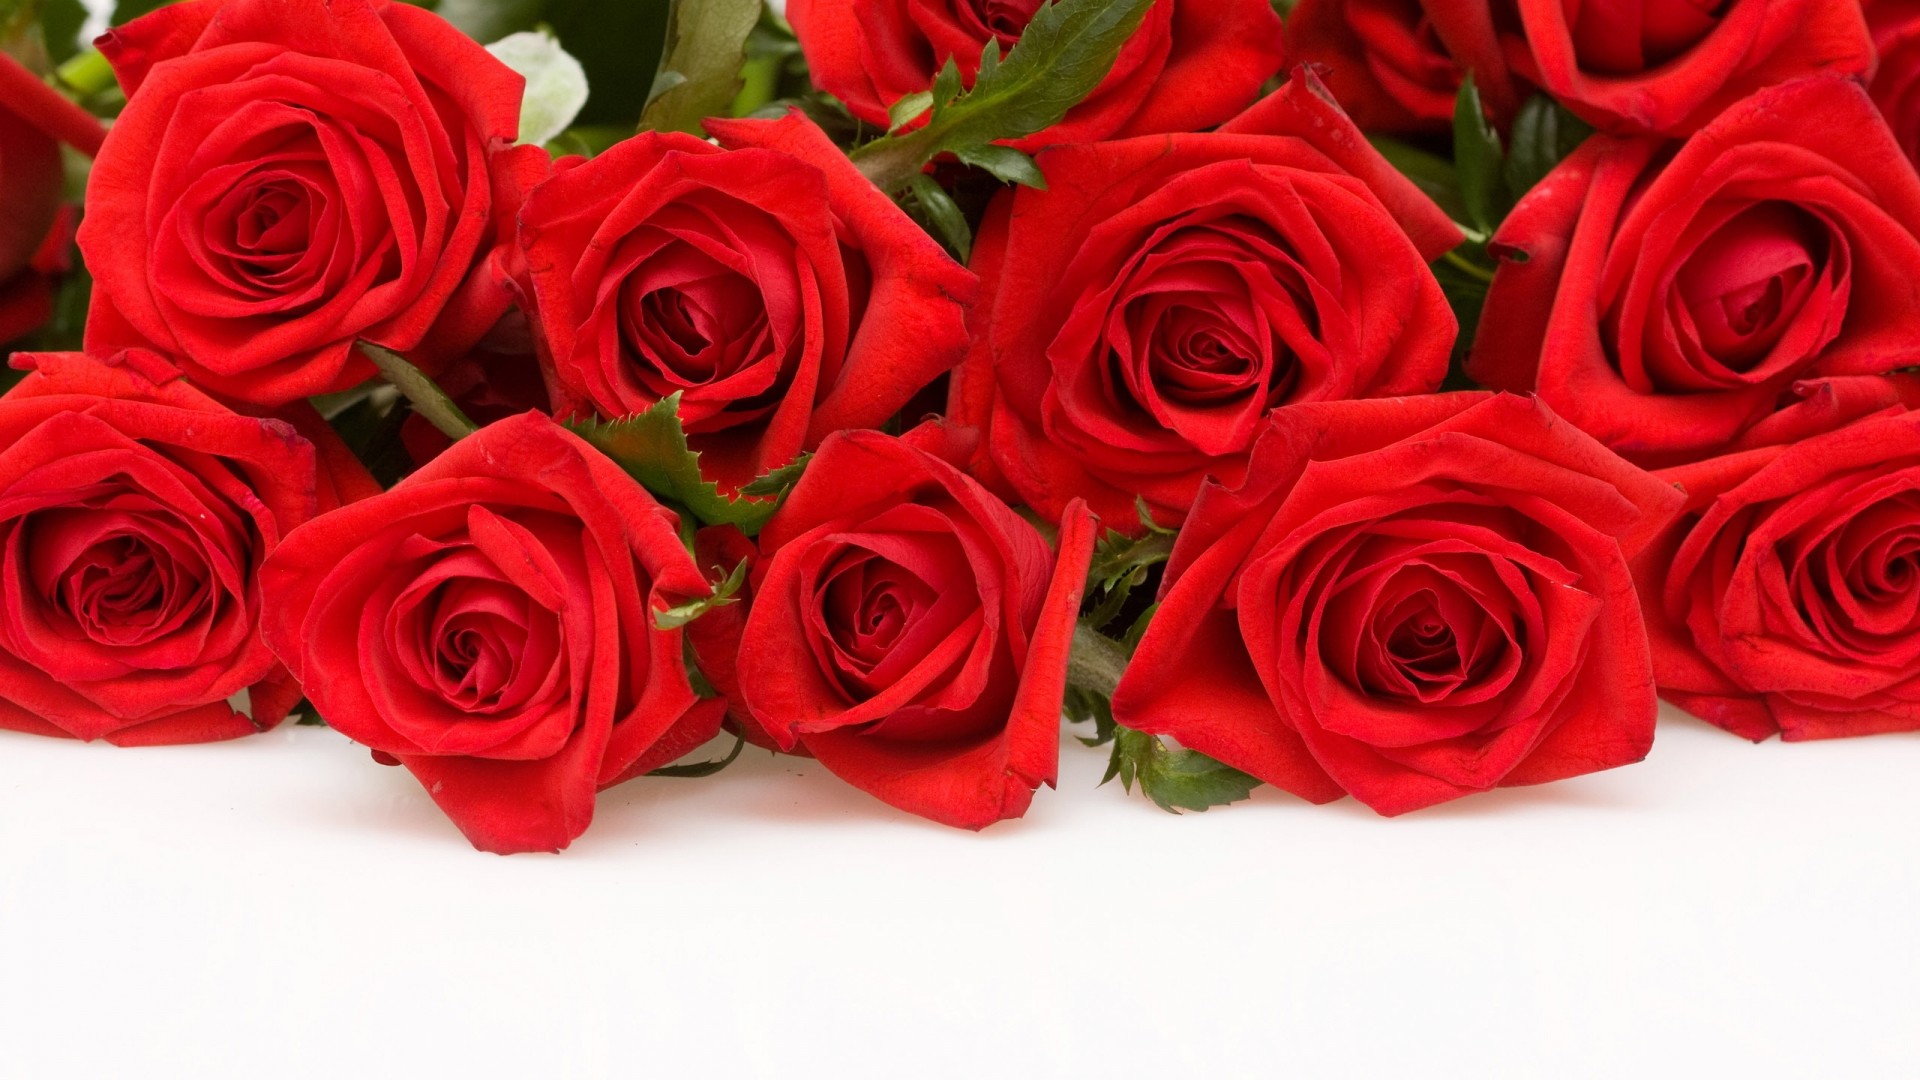 1920x1080 Full HD 1080p Red Rose Wallpapers